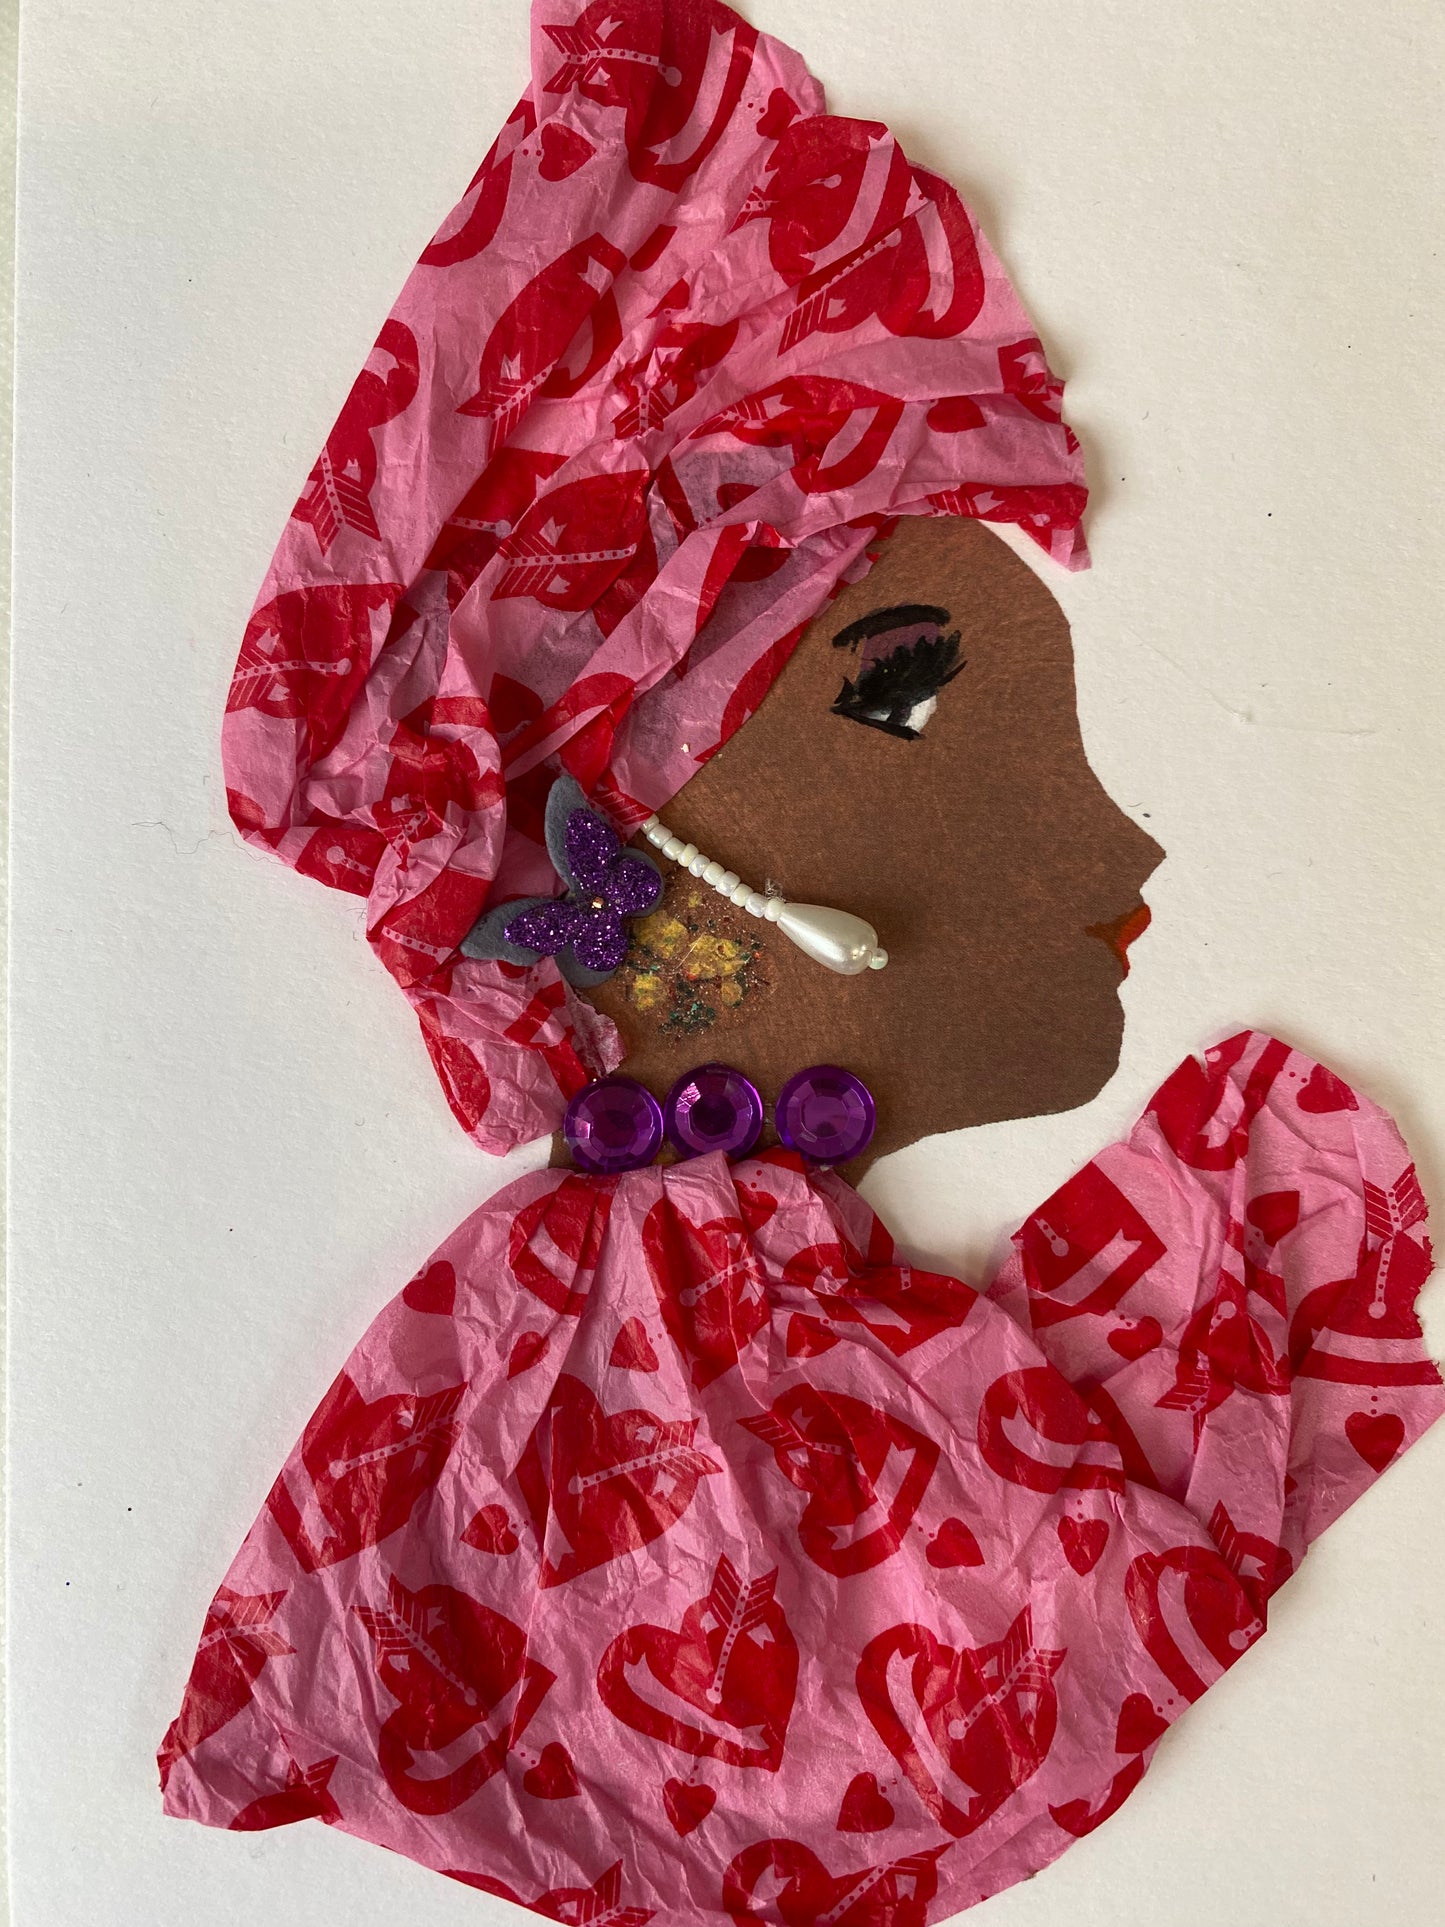 I designed this card of a woman named Raspberry Pink. She has a brown skin tone and wears a pink with red hearts pattern headwrap. She wears a matching pink blouse with a red heart pattern. She wears a purple necklace with dangling pearl earrings. To the side of her earring there is a sparkly purple and gray butterfly. 